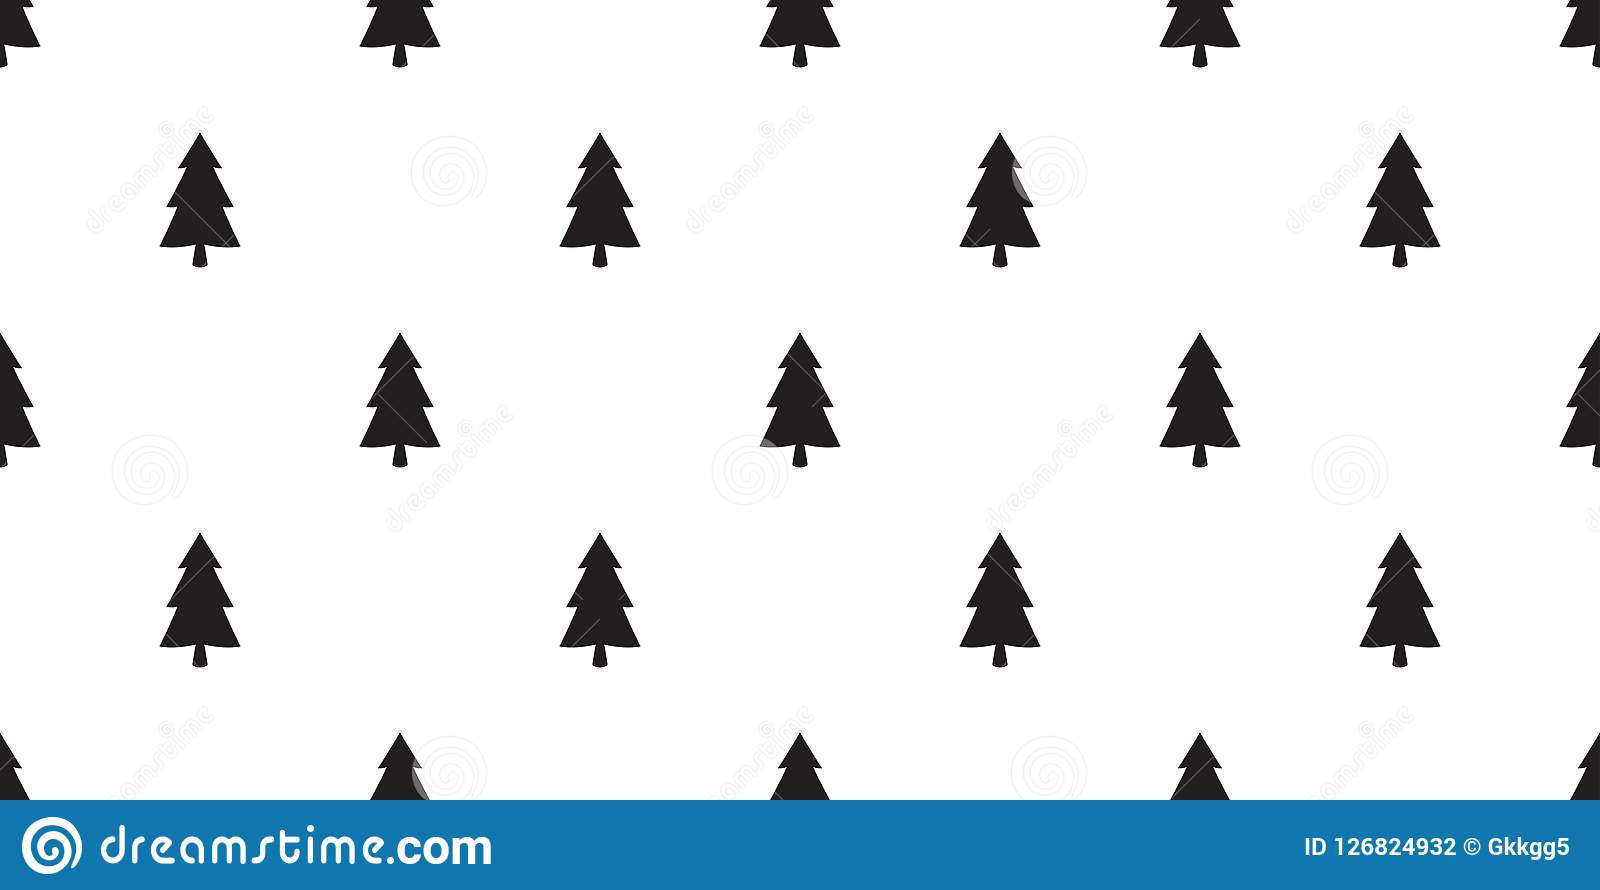 Christmas tree seamless pattern vector santa claus snow forest wood new year tile background repeat wallpaper scarf wallpaper illu stock illustration